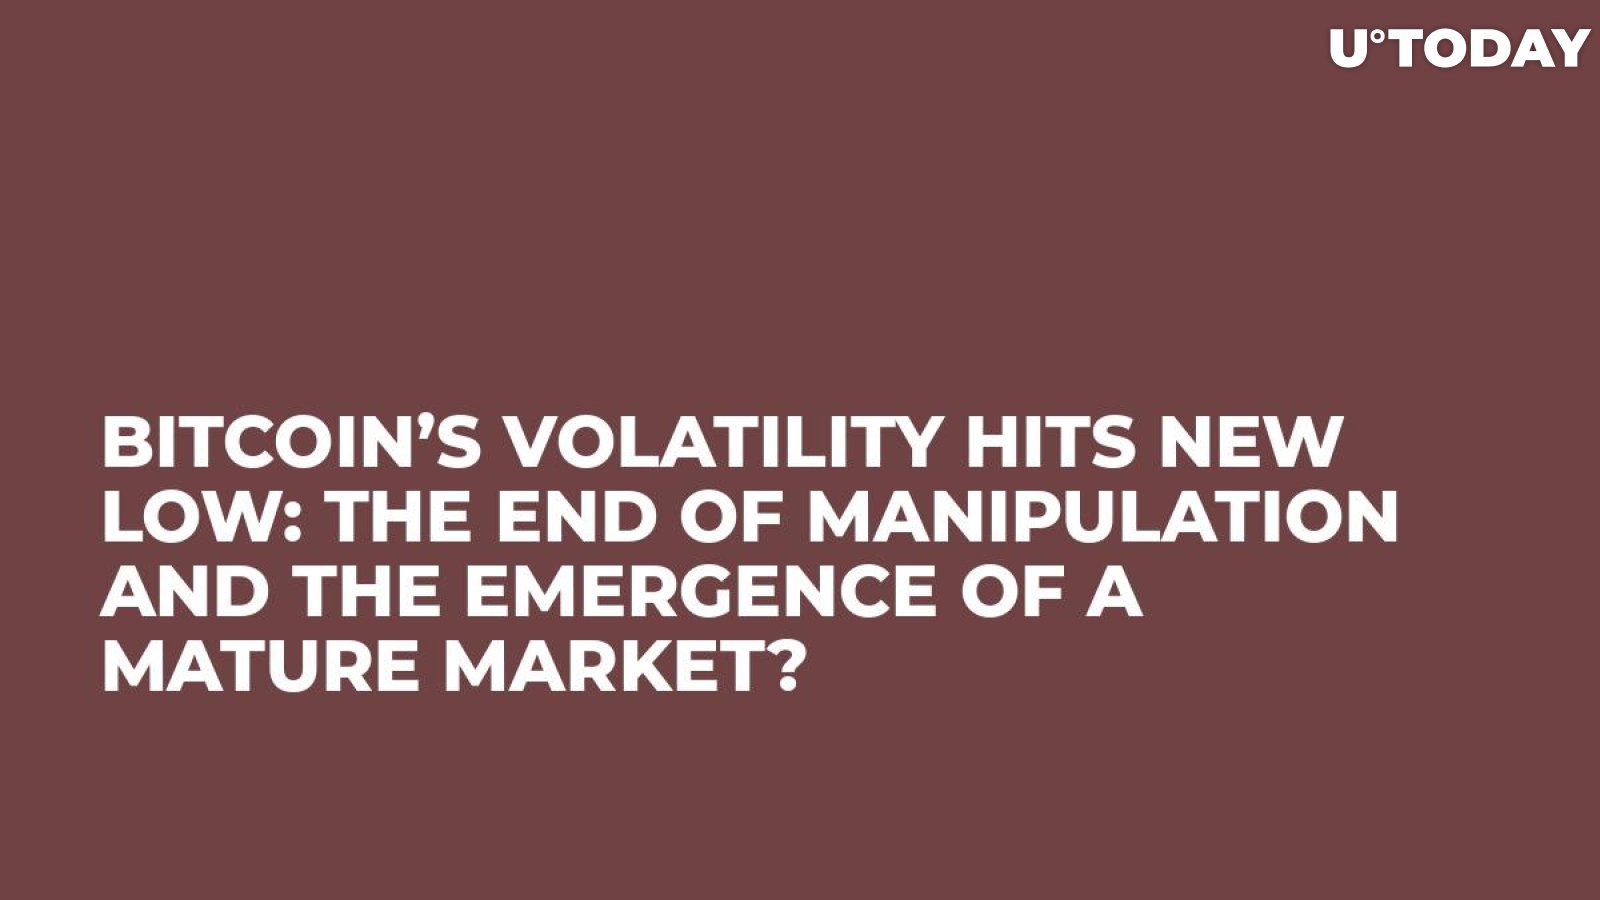 Bitcoin’s Volatility Hits New Low: The End of Manipulation and the Emergence of a Mature Market?